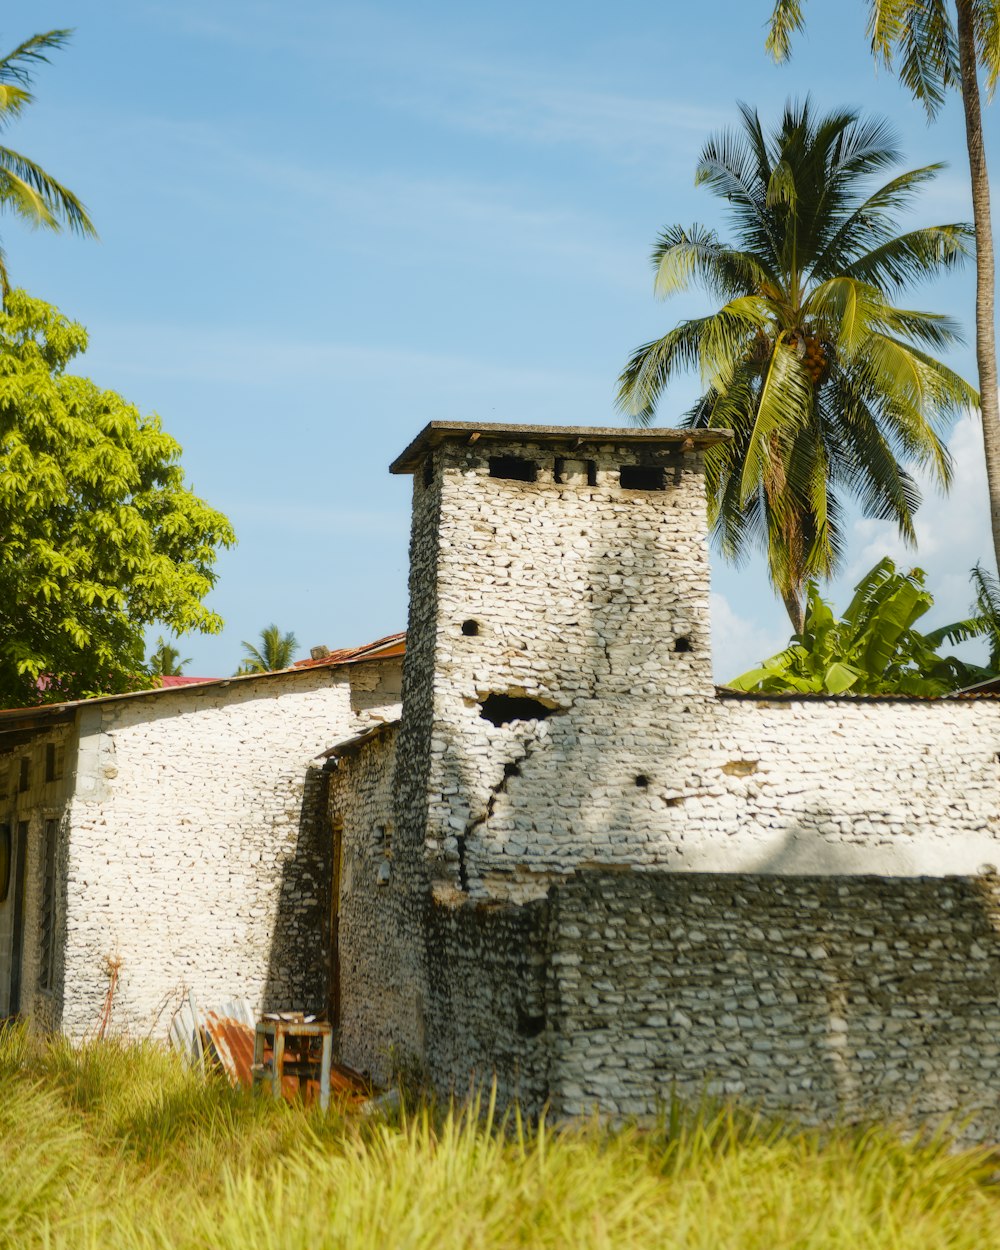 an old brick building with palm trees in the background